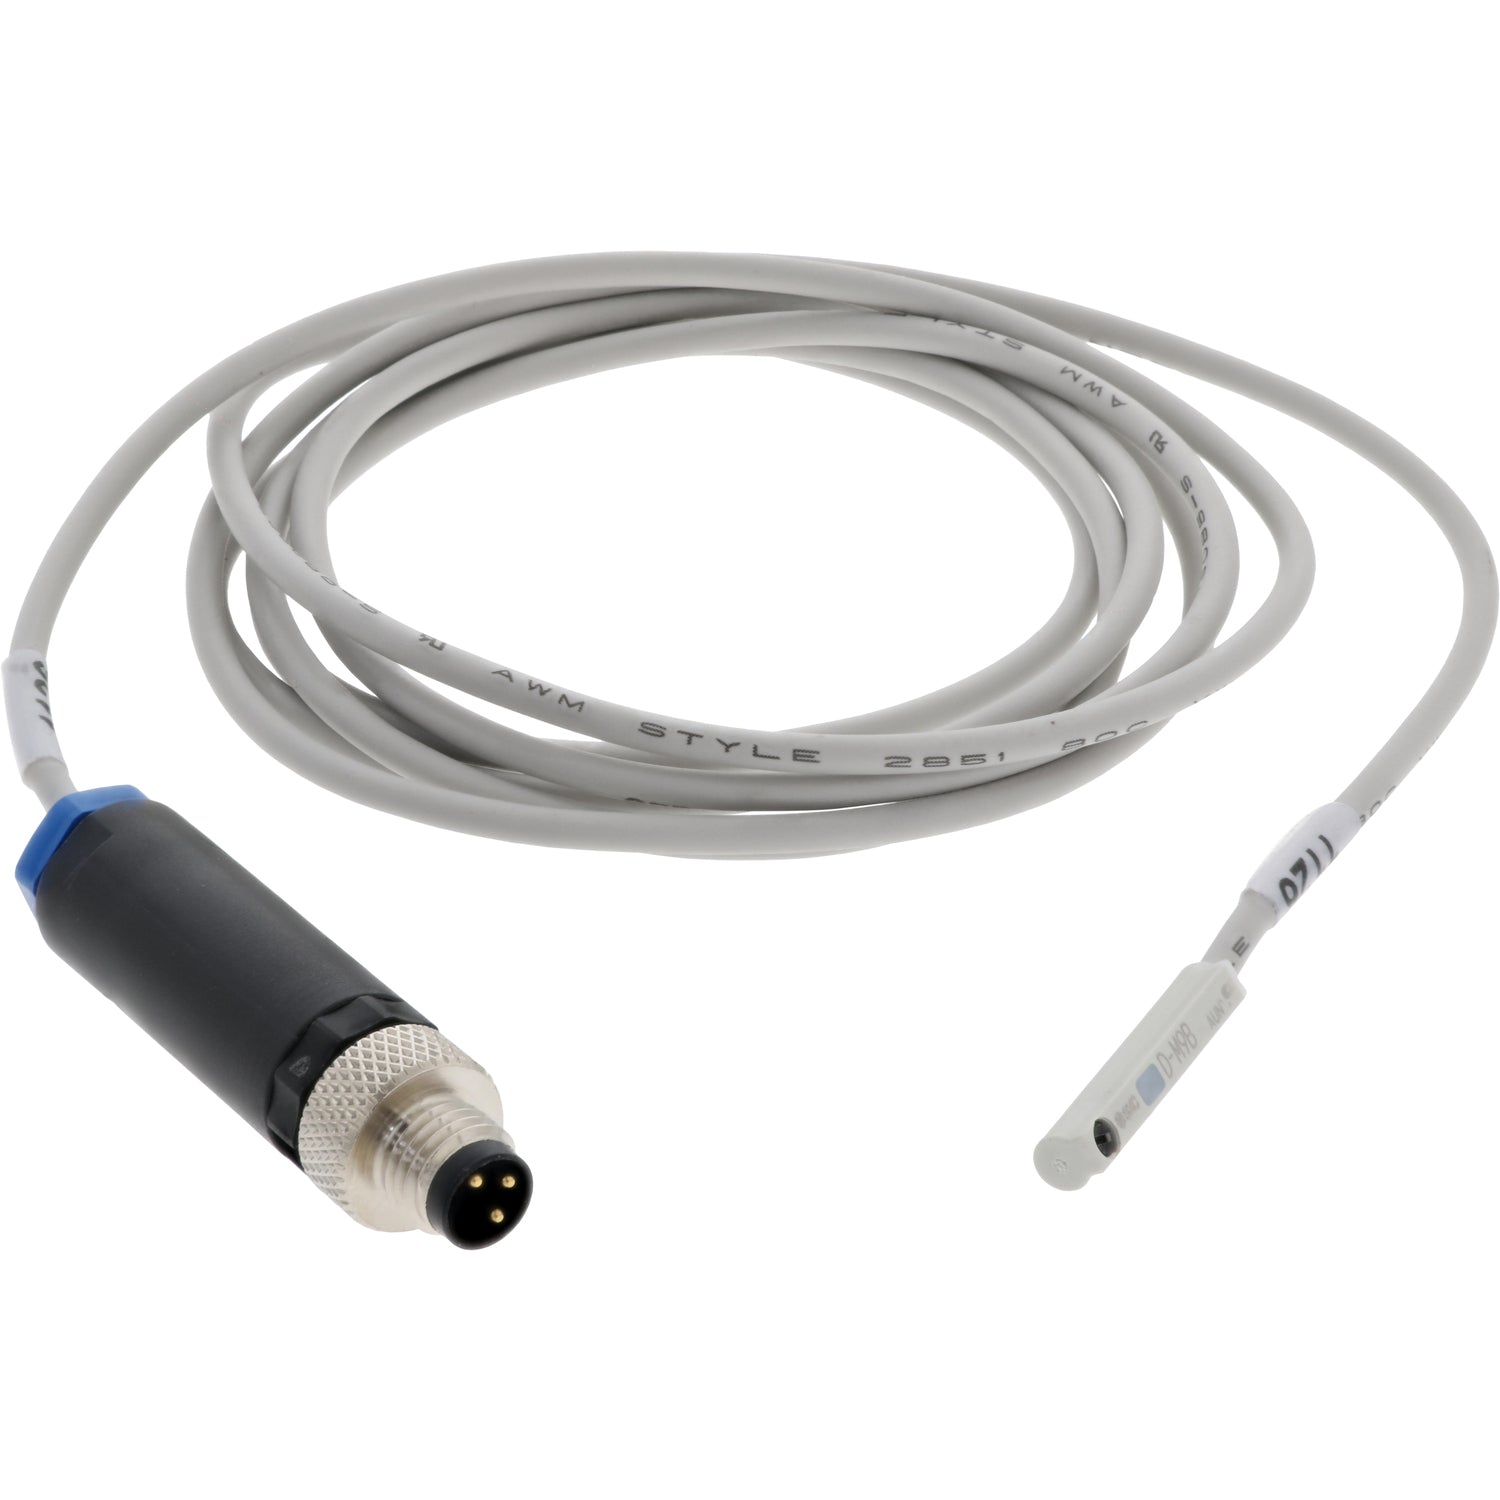 Light Grey, coiled connecting cable with small, white, rectangular sensor on one end and a blue and black quick connect on other end. Sensor and cable are shown on a white back ground.